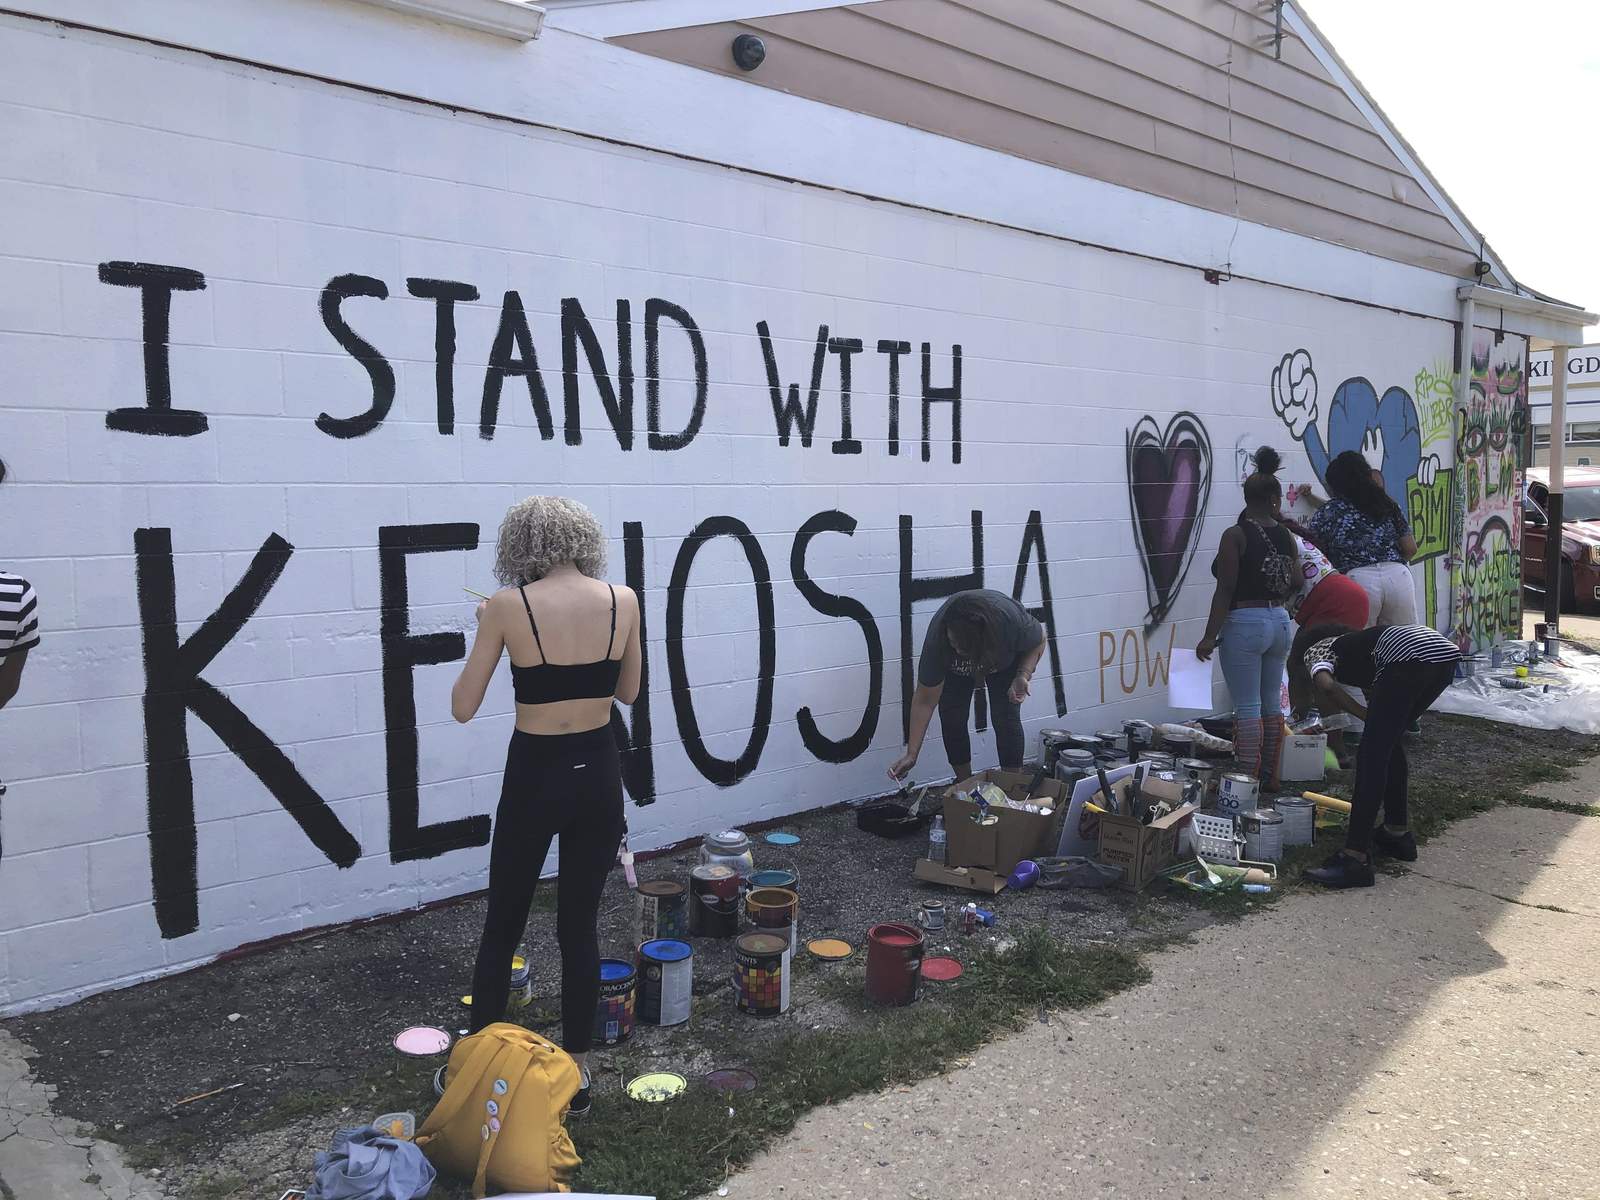 Police: Most arrested during Kenosha protests not from city